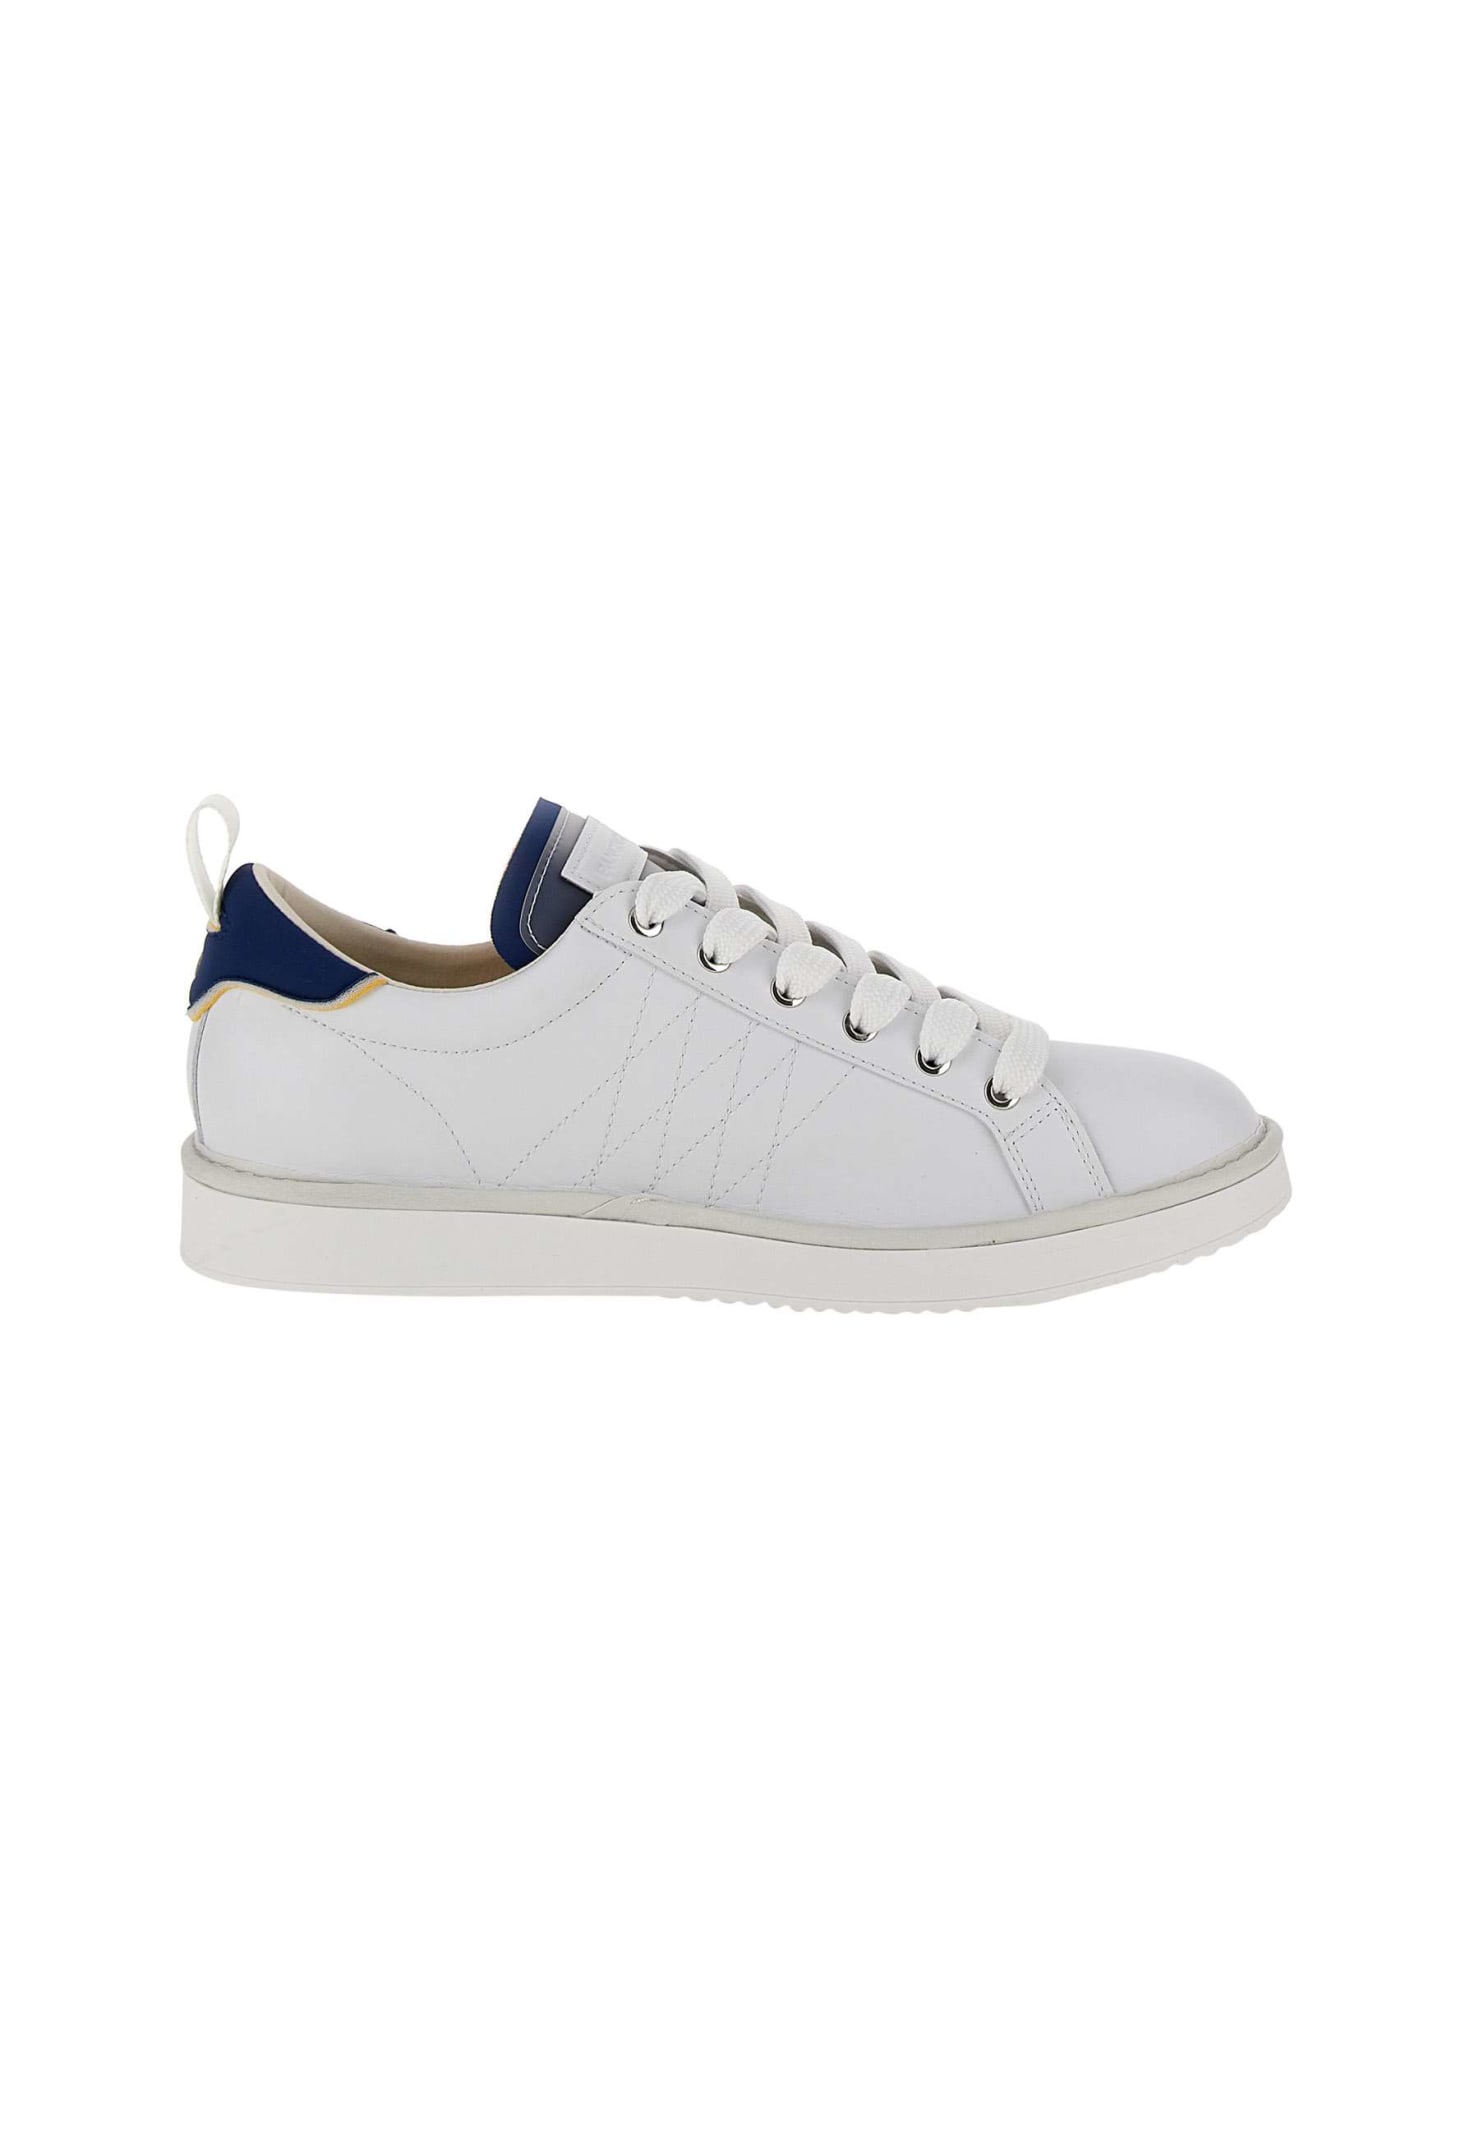 Pànchic P01 Trainers In White/ Blue | ModeSens